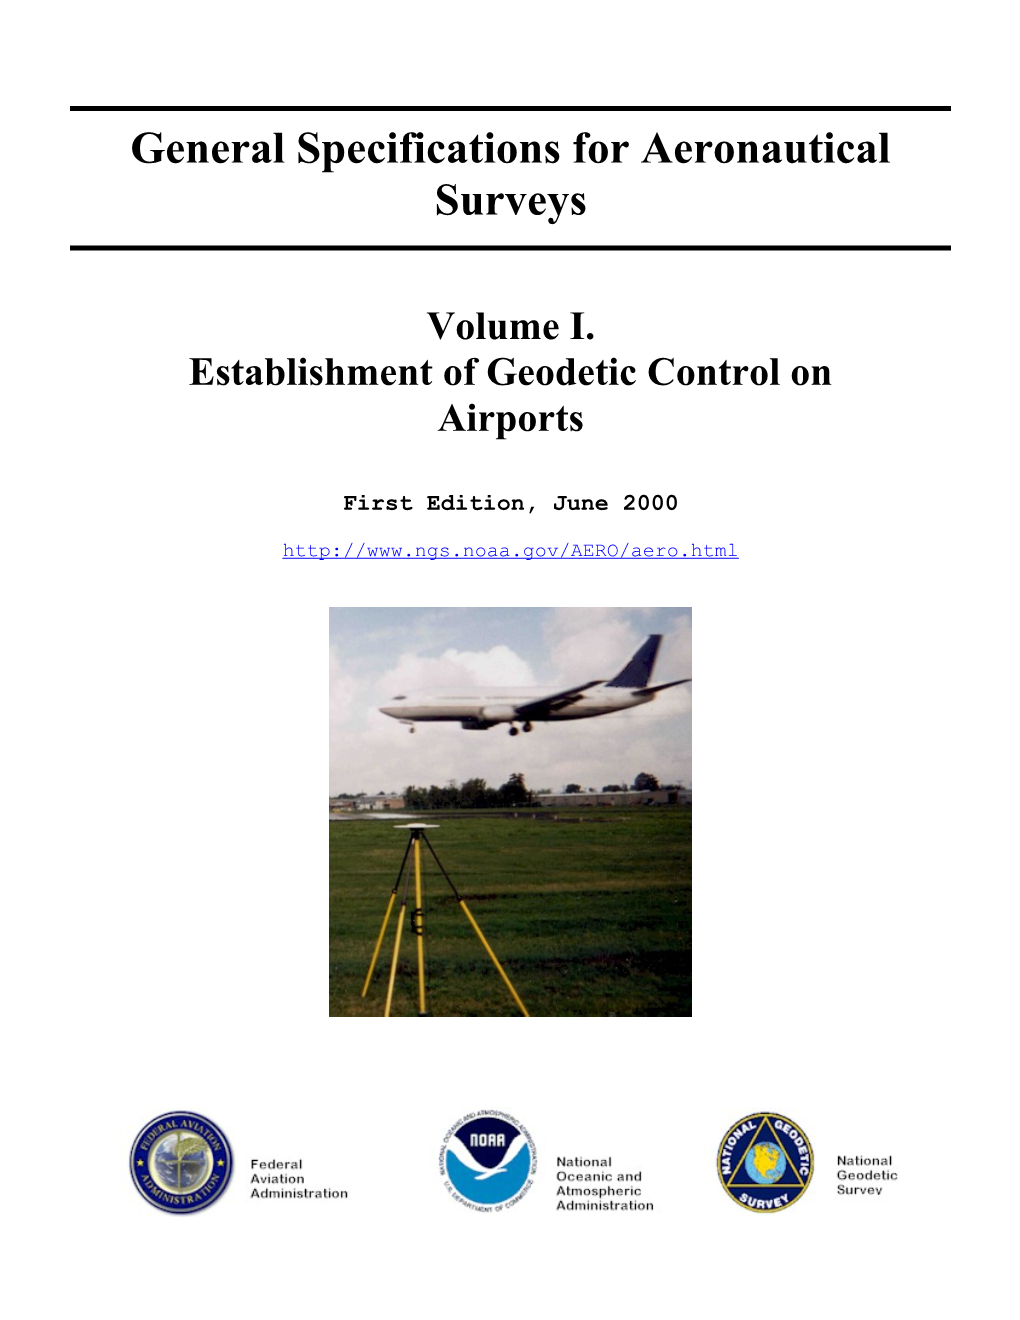 Establishment of Geodetic Control on Airports